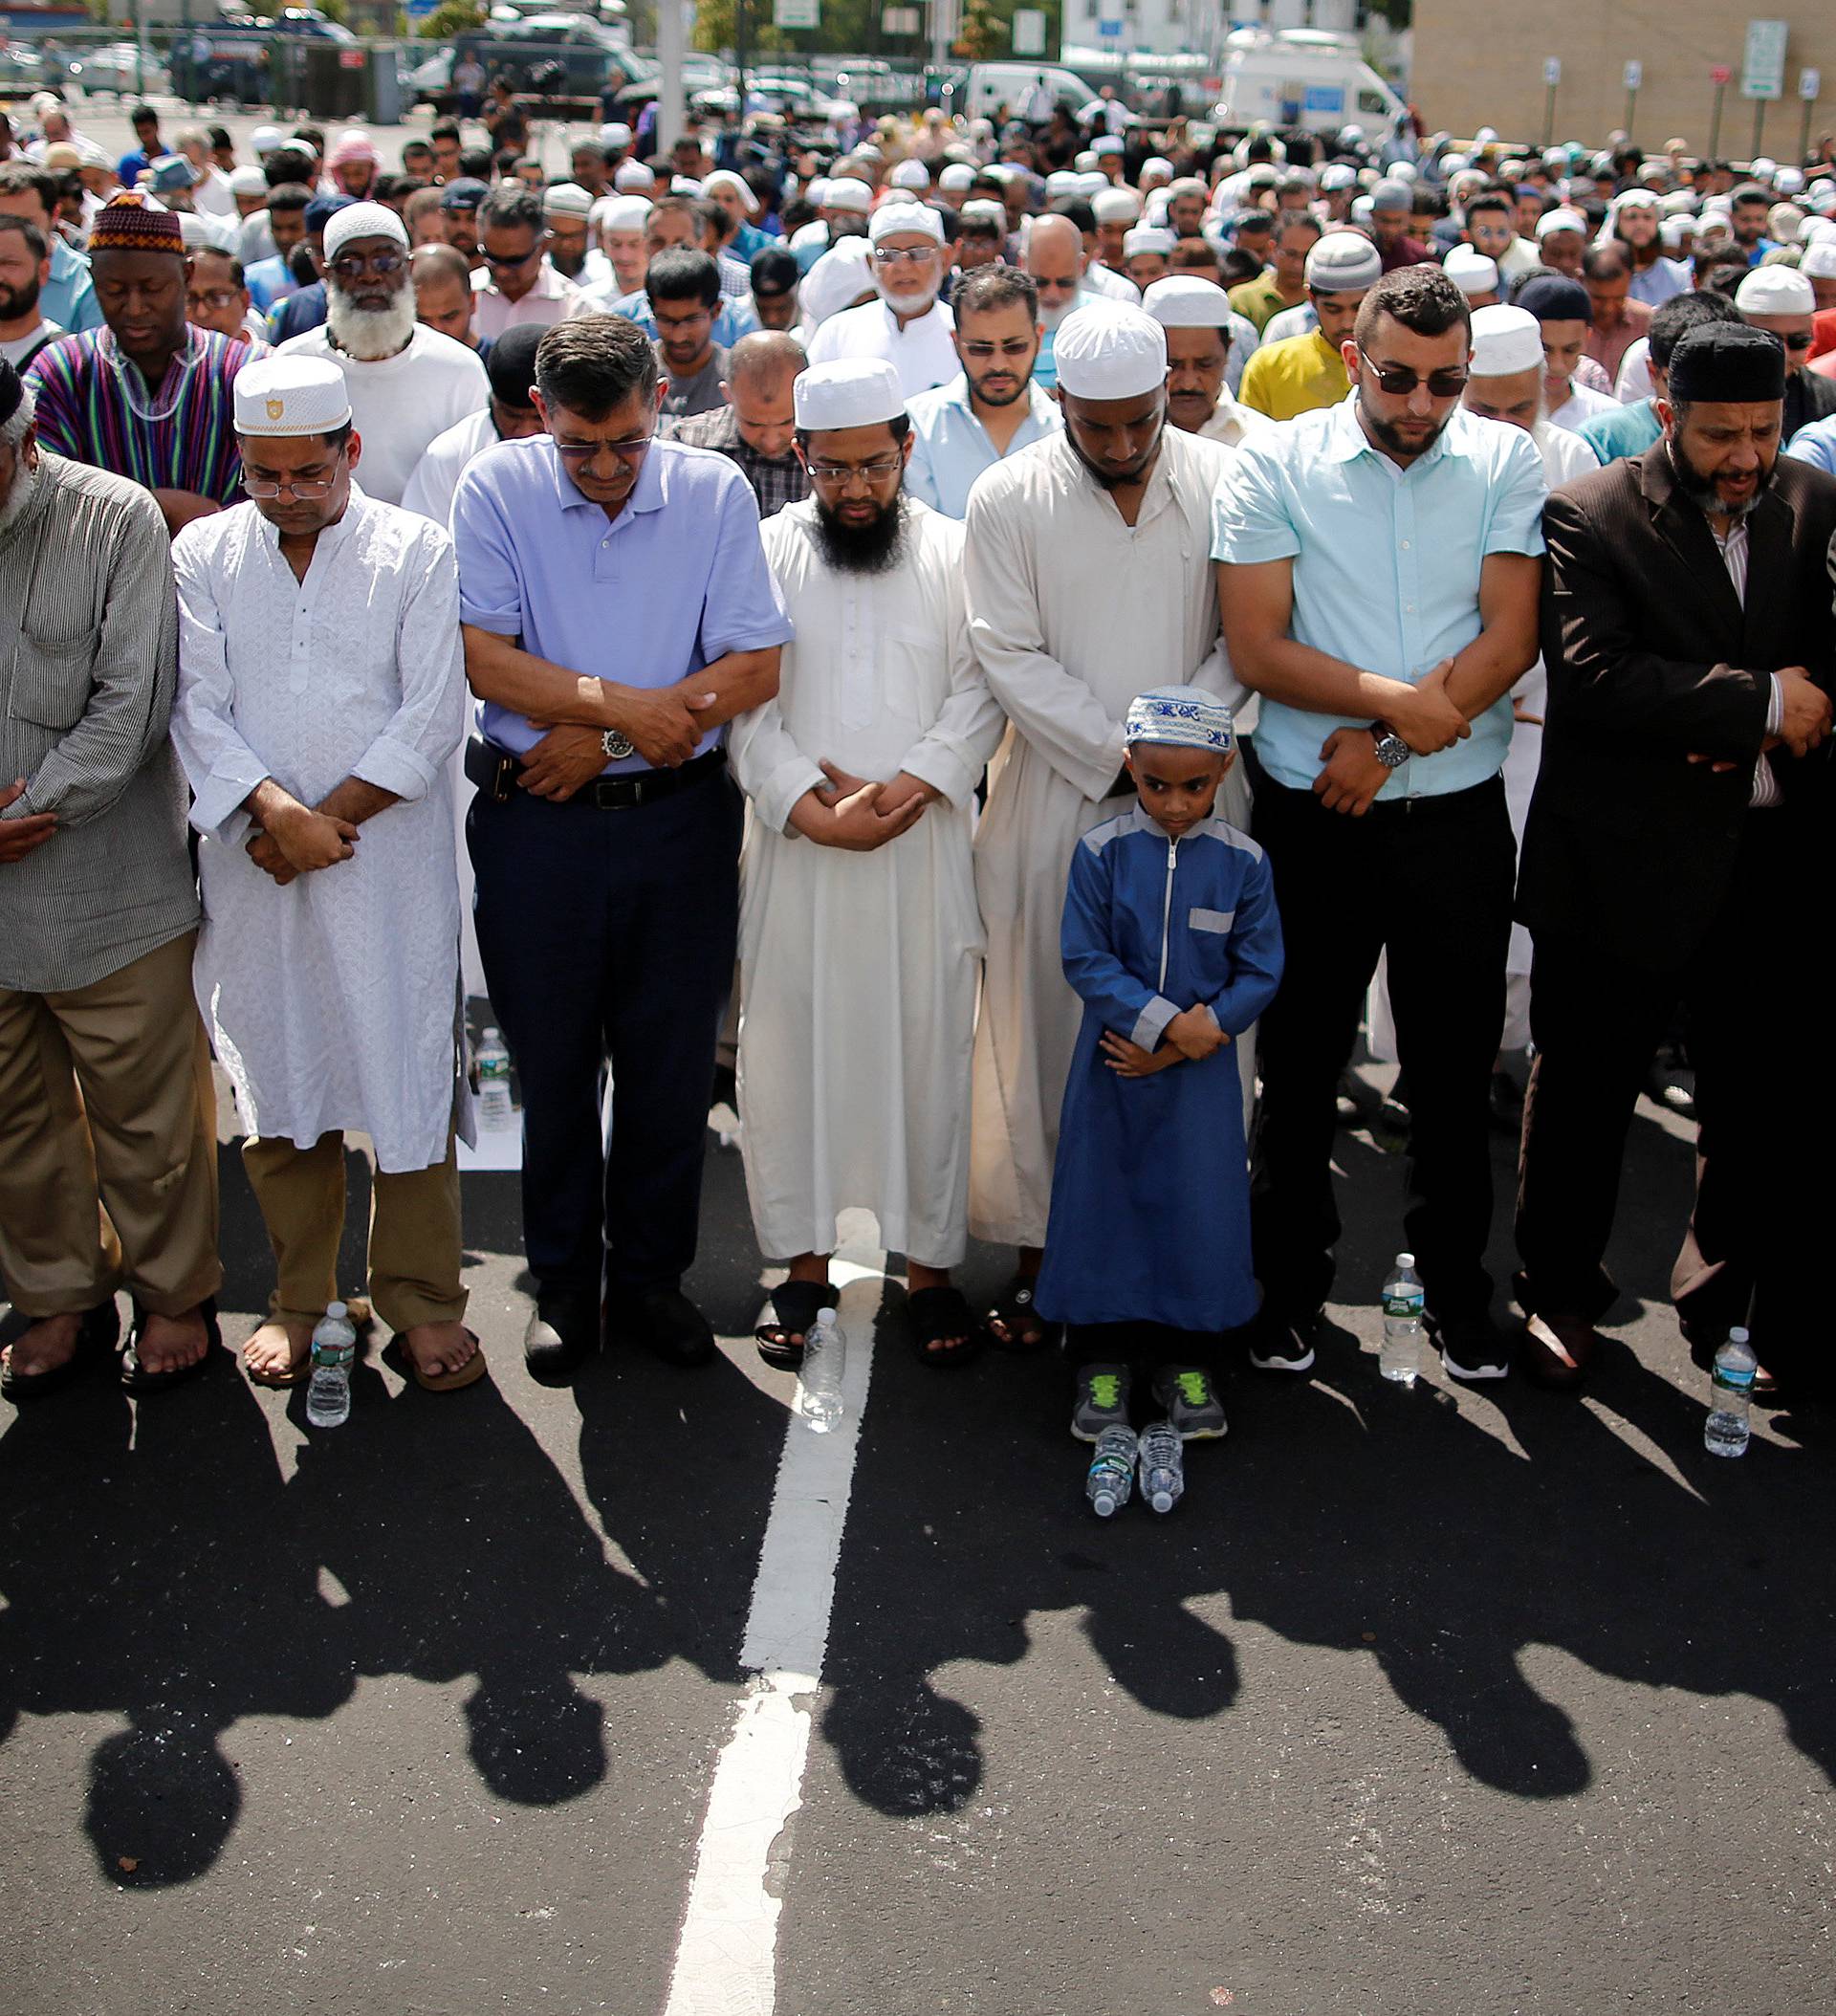 Community members pray during the funeral service of Akonjee, and Uddin in the Queens borough of New York City